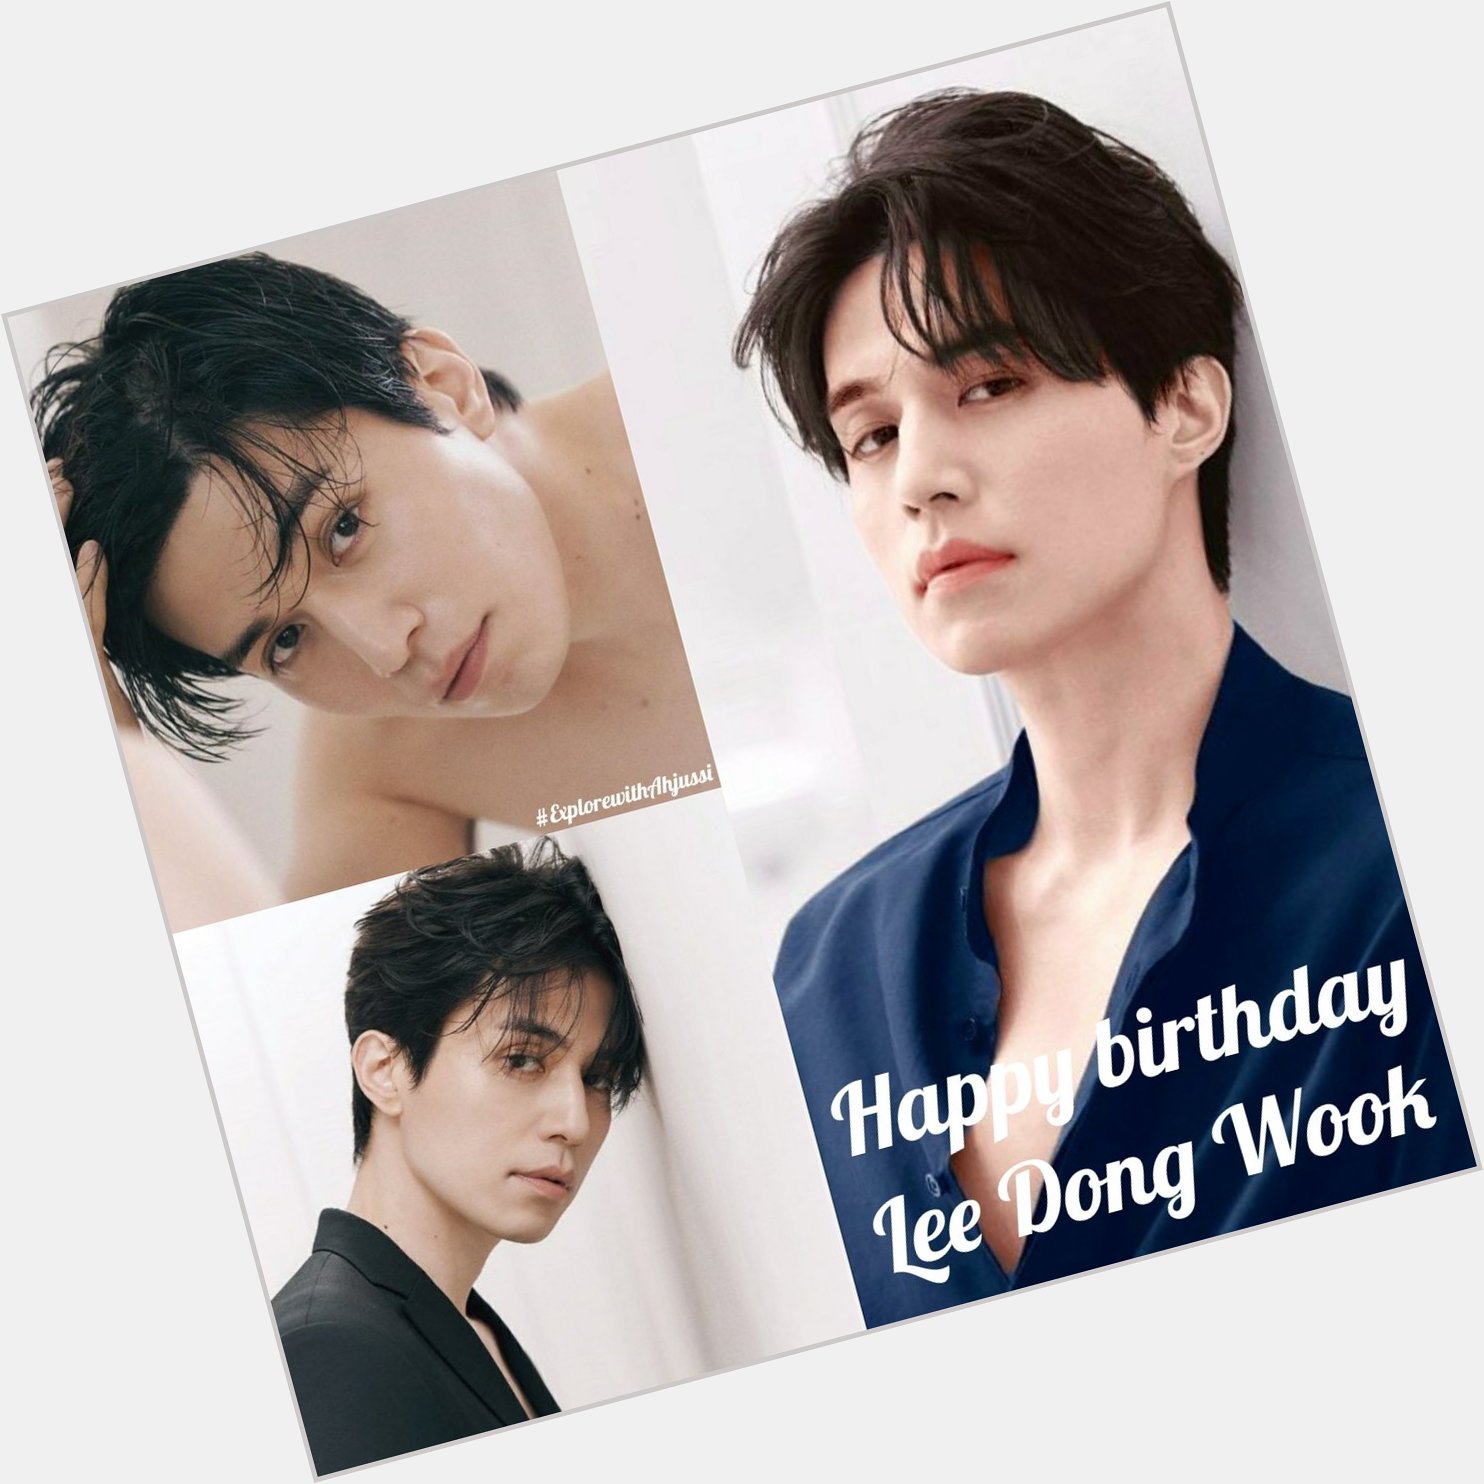 Happy birthday Lee Dong Wook  